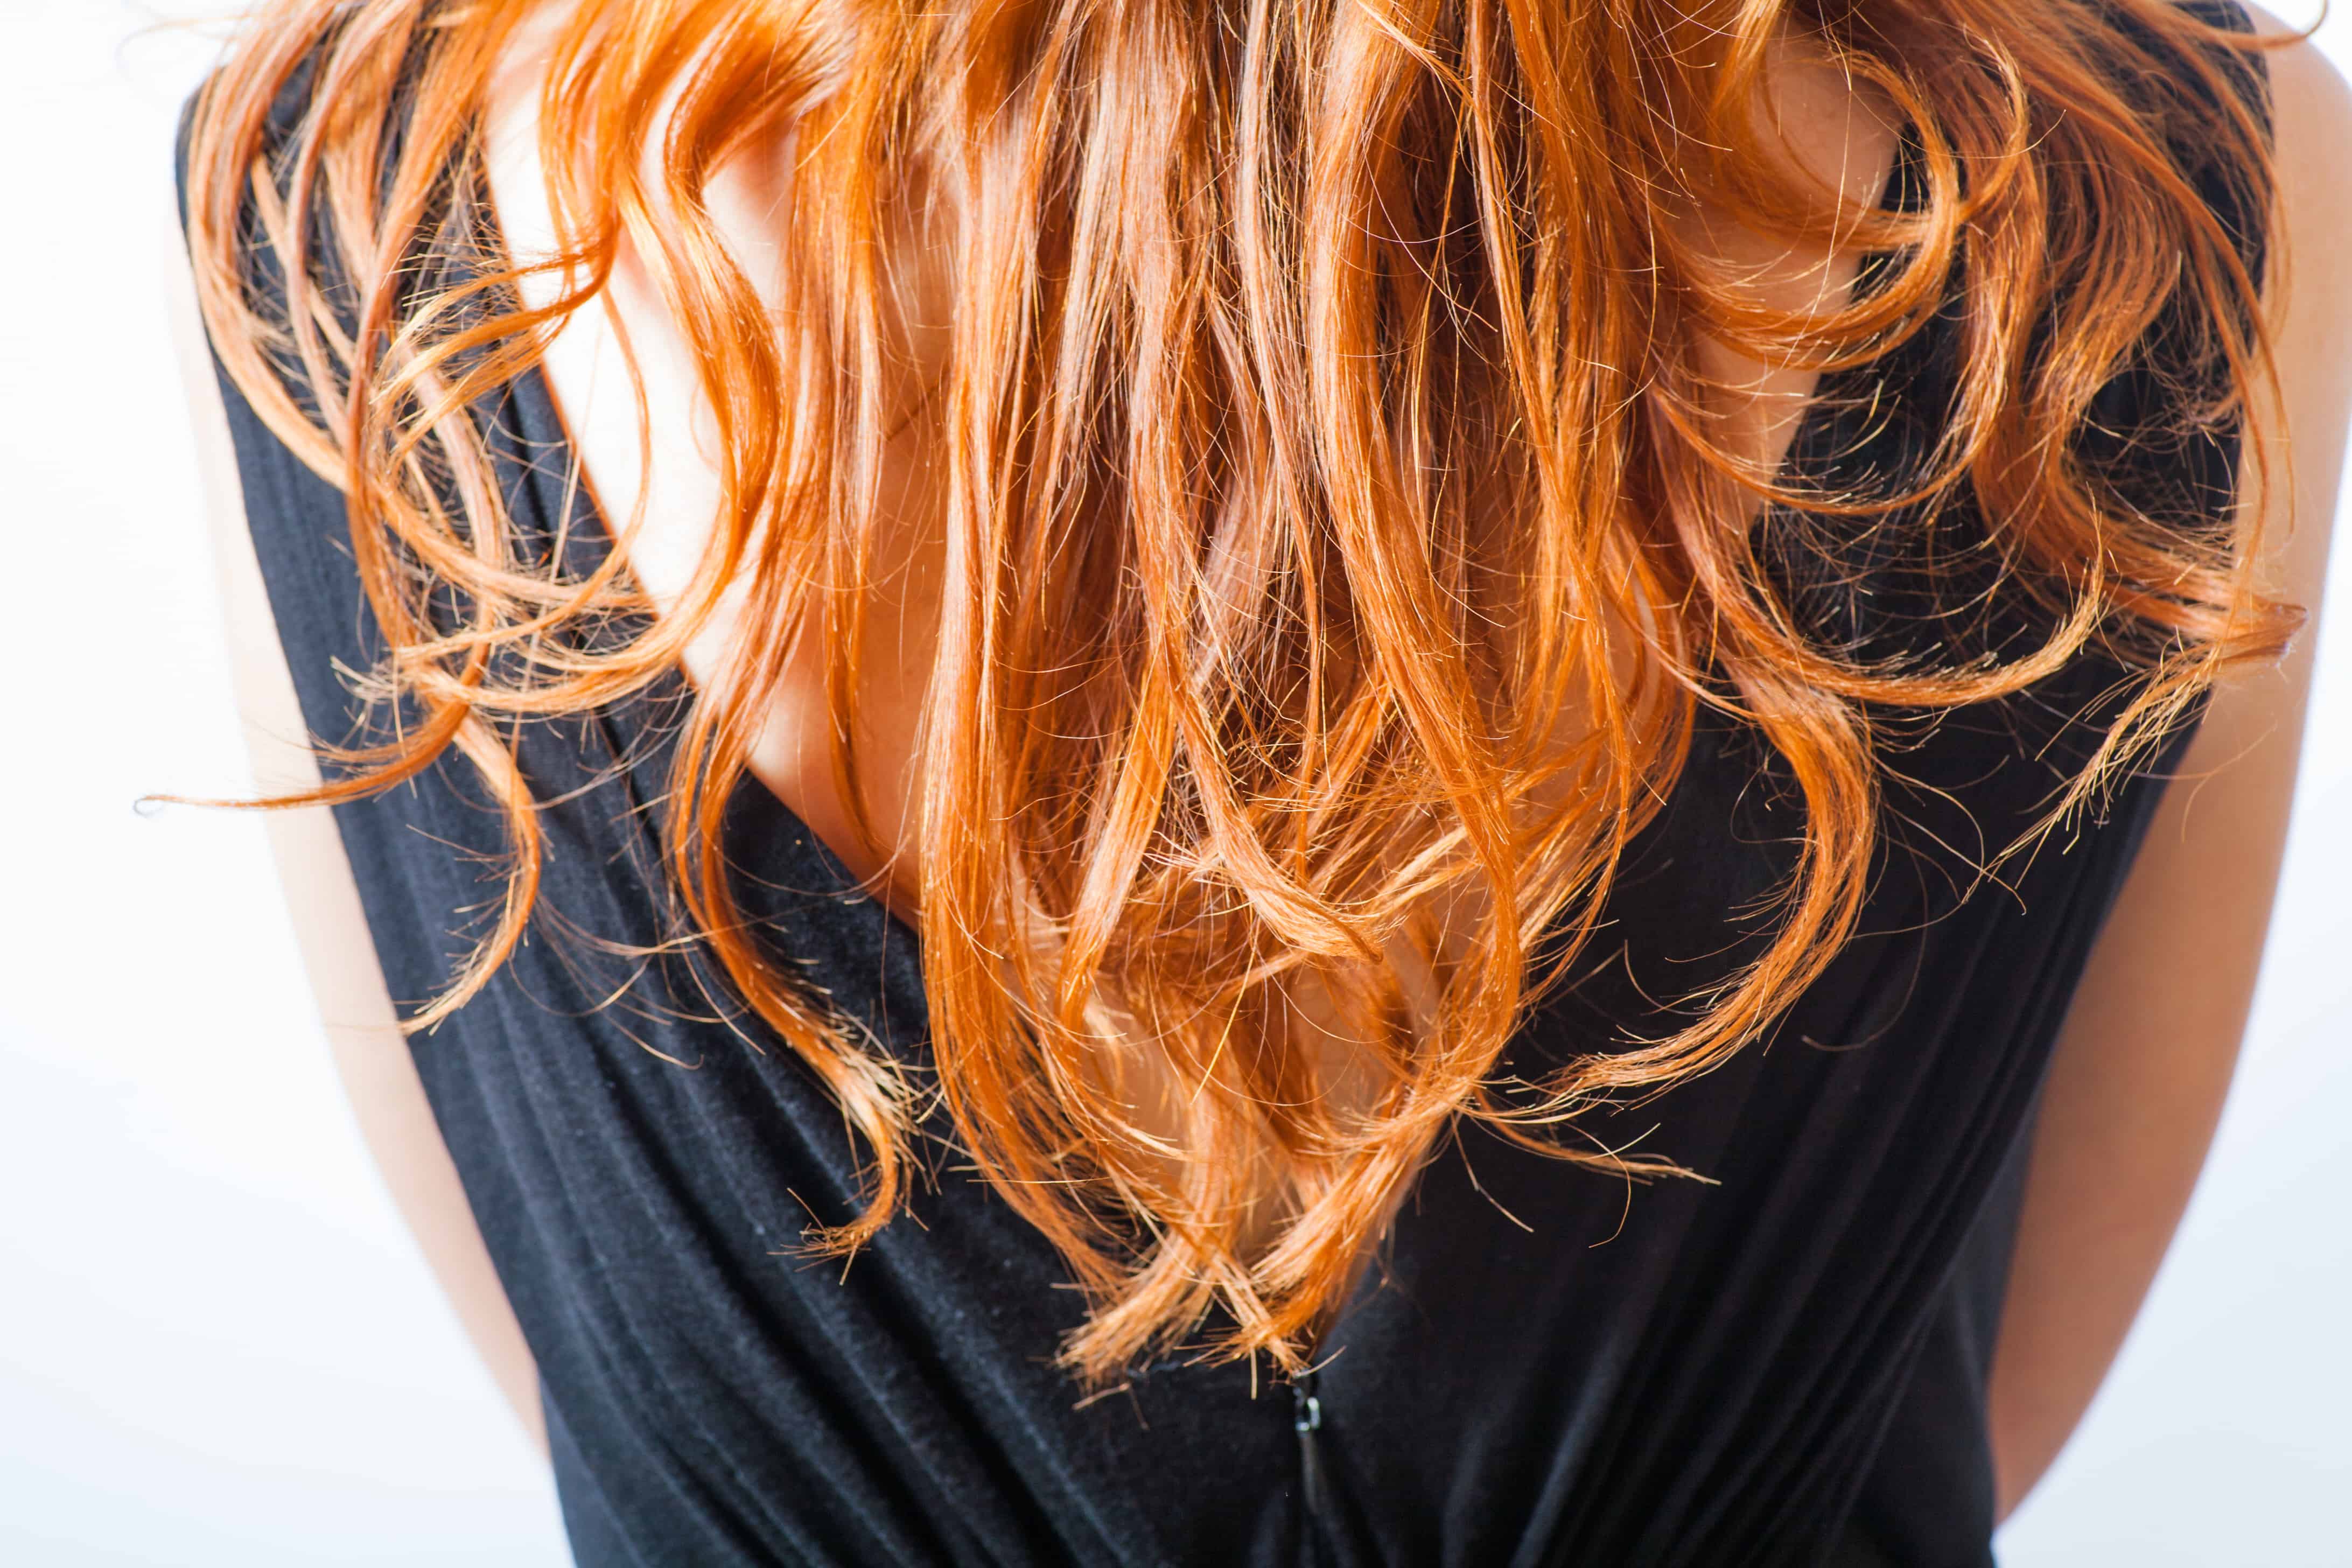 Does Laser Hair Removal Work For Red Hair?